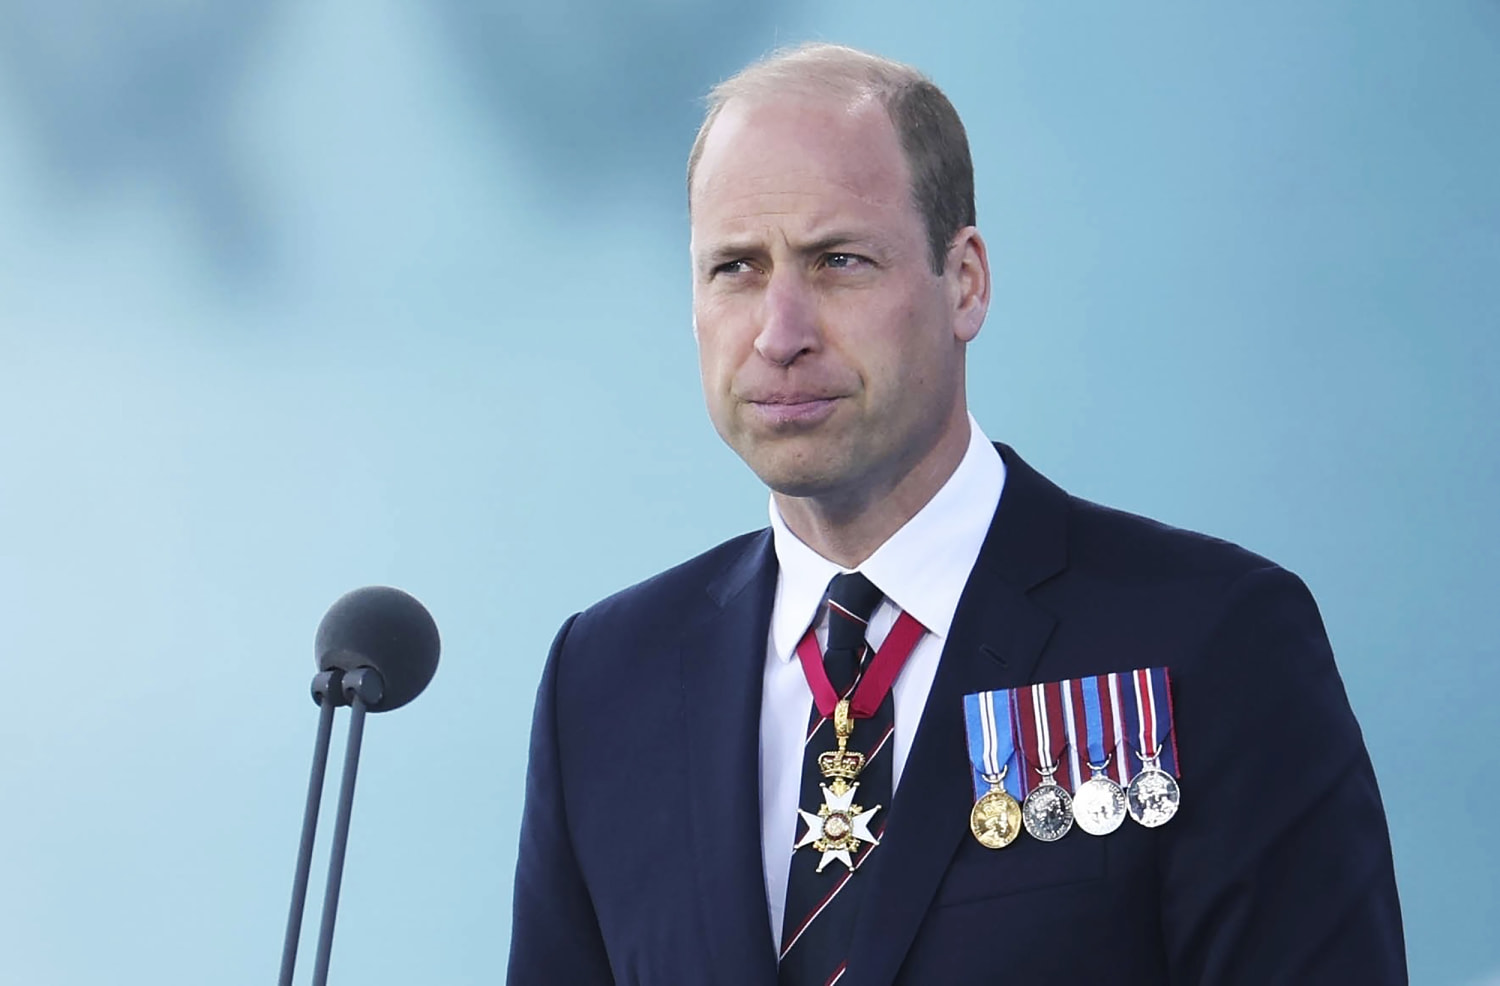 Princess Kate is getting 'better' and would have loved to attend D-Day events, Prince William says